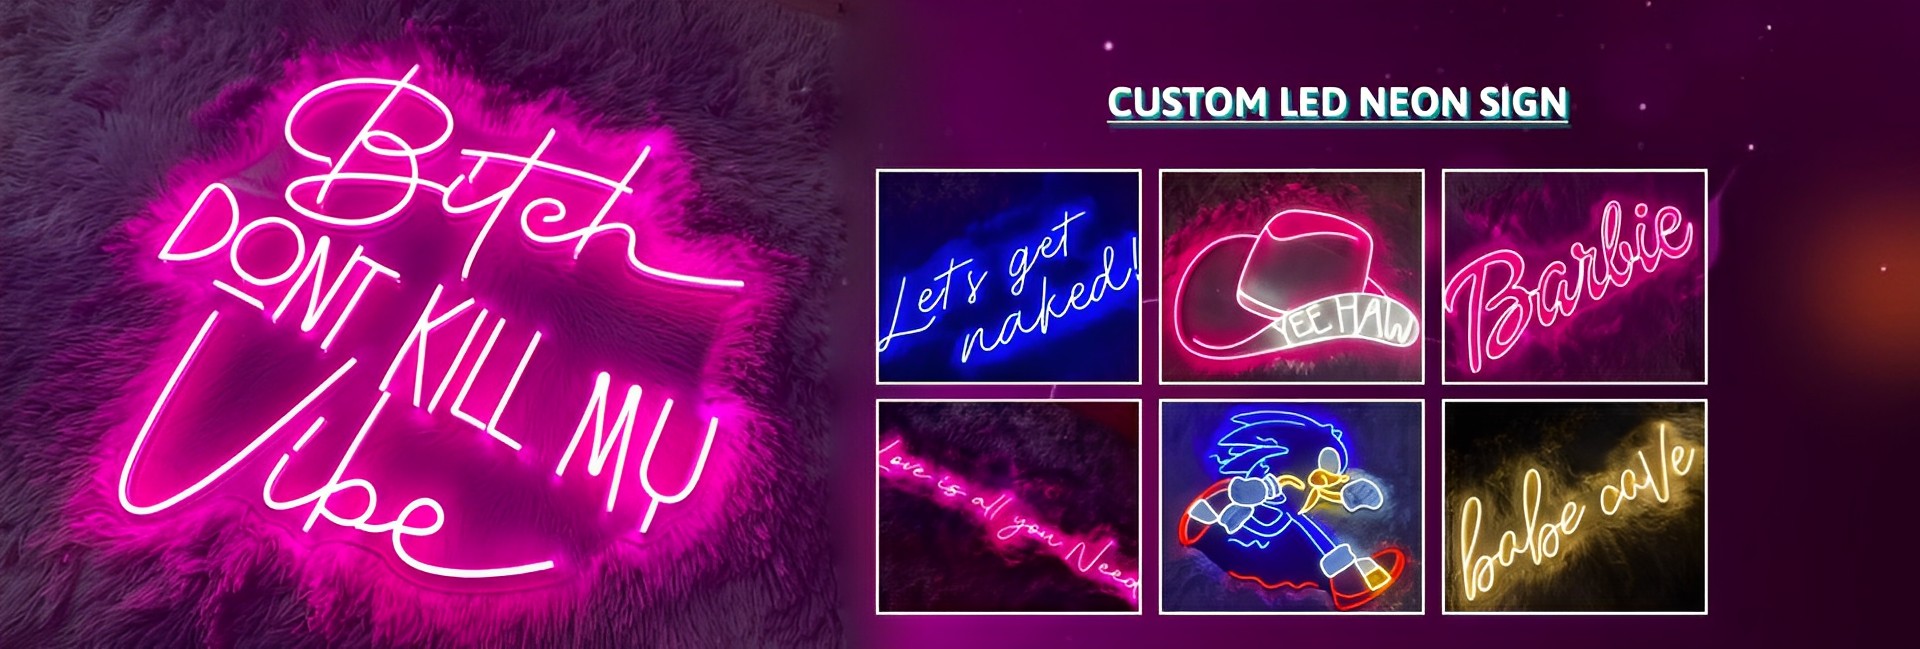 LED NEON SIGN